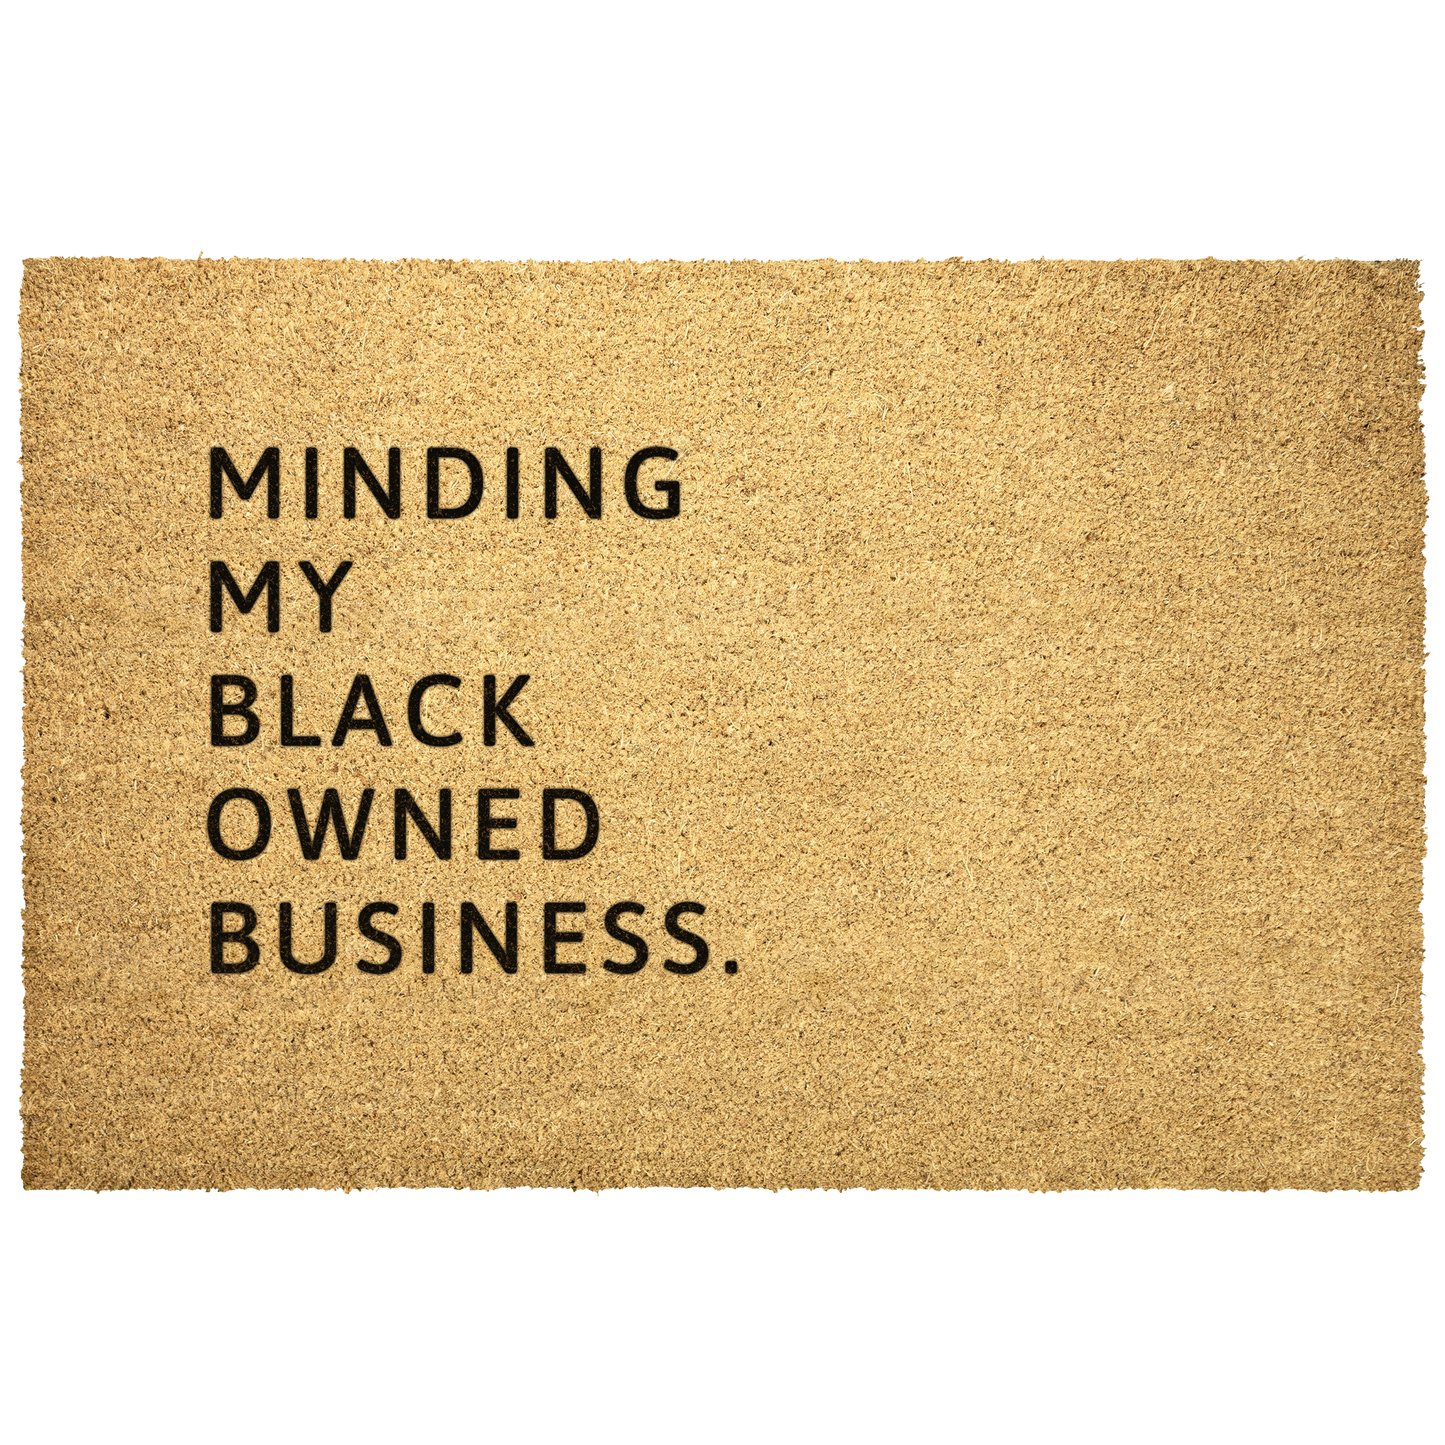 Minding My Black Owned Business Doormat